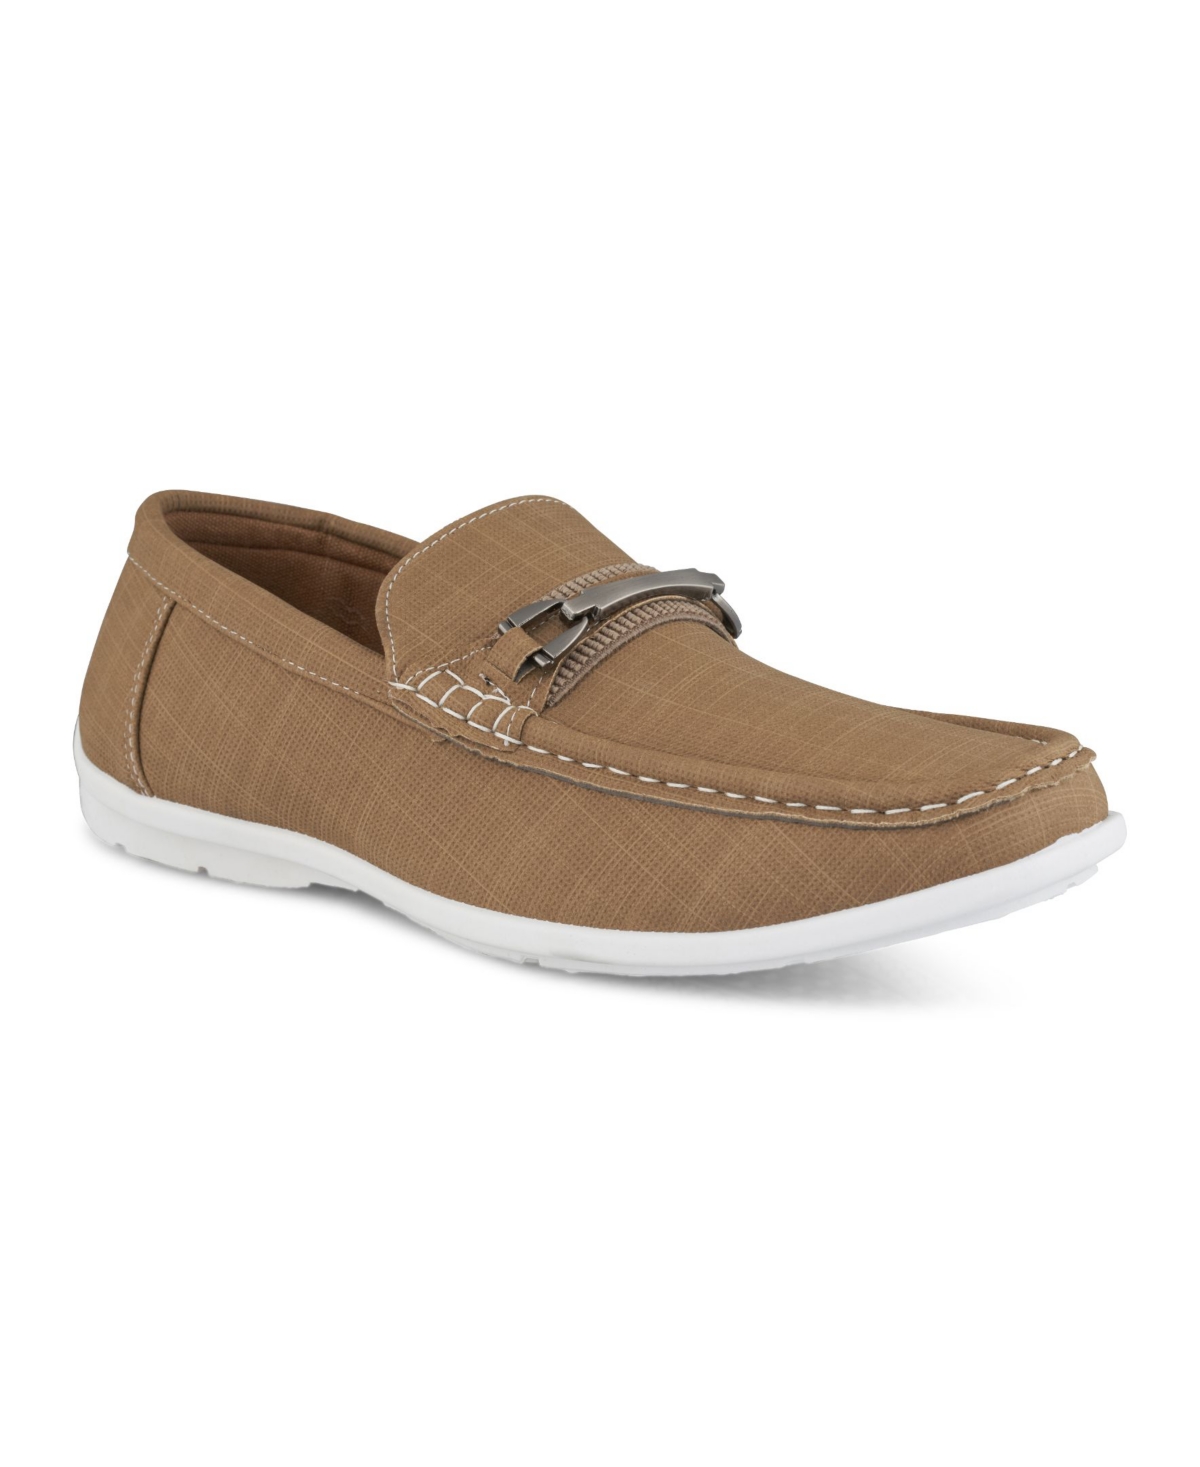 Akademiks Men's Moccasin Loafers Men's Shoes In Tan